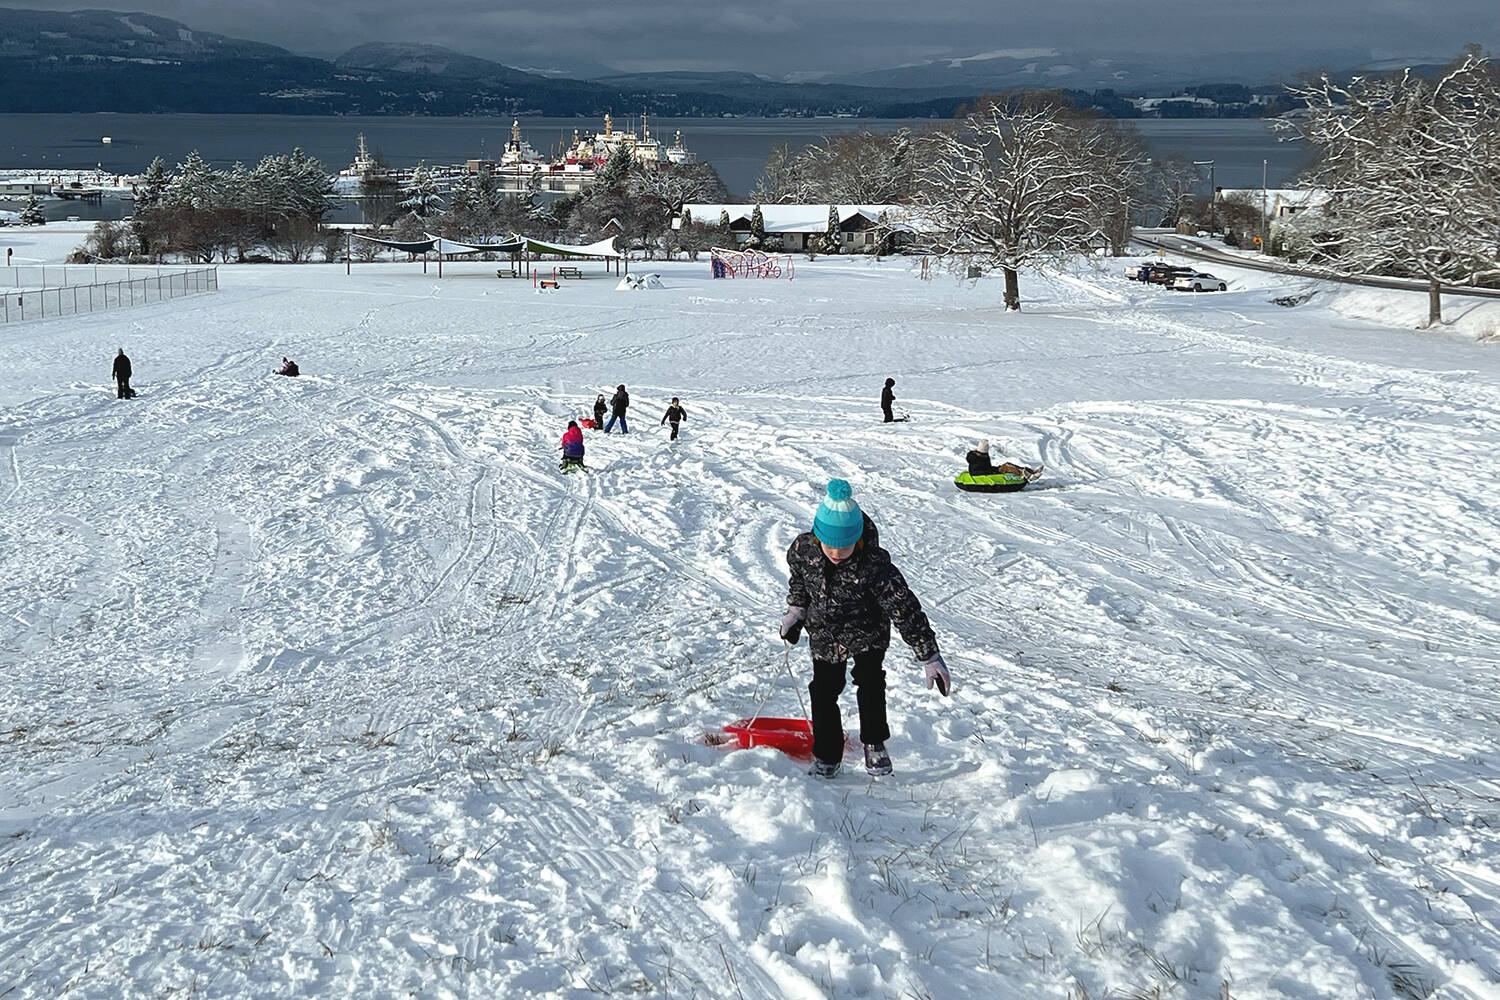 Children hit the sledding hill off Mills Road in North Saanich near Victoria International Airport after a late-December snowfall in 2021. (Black Press Media file photo)